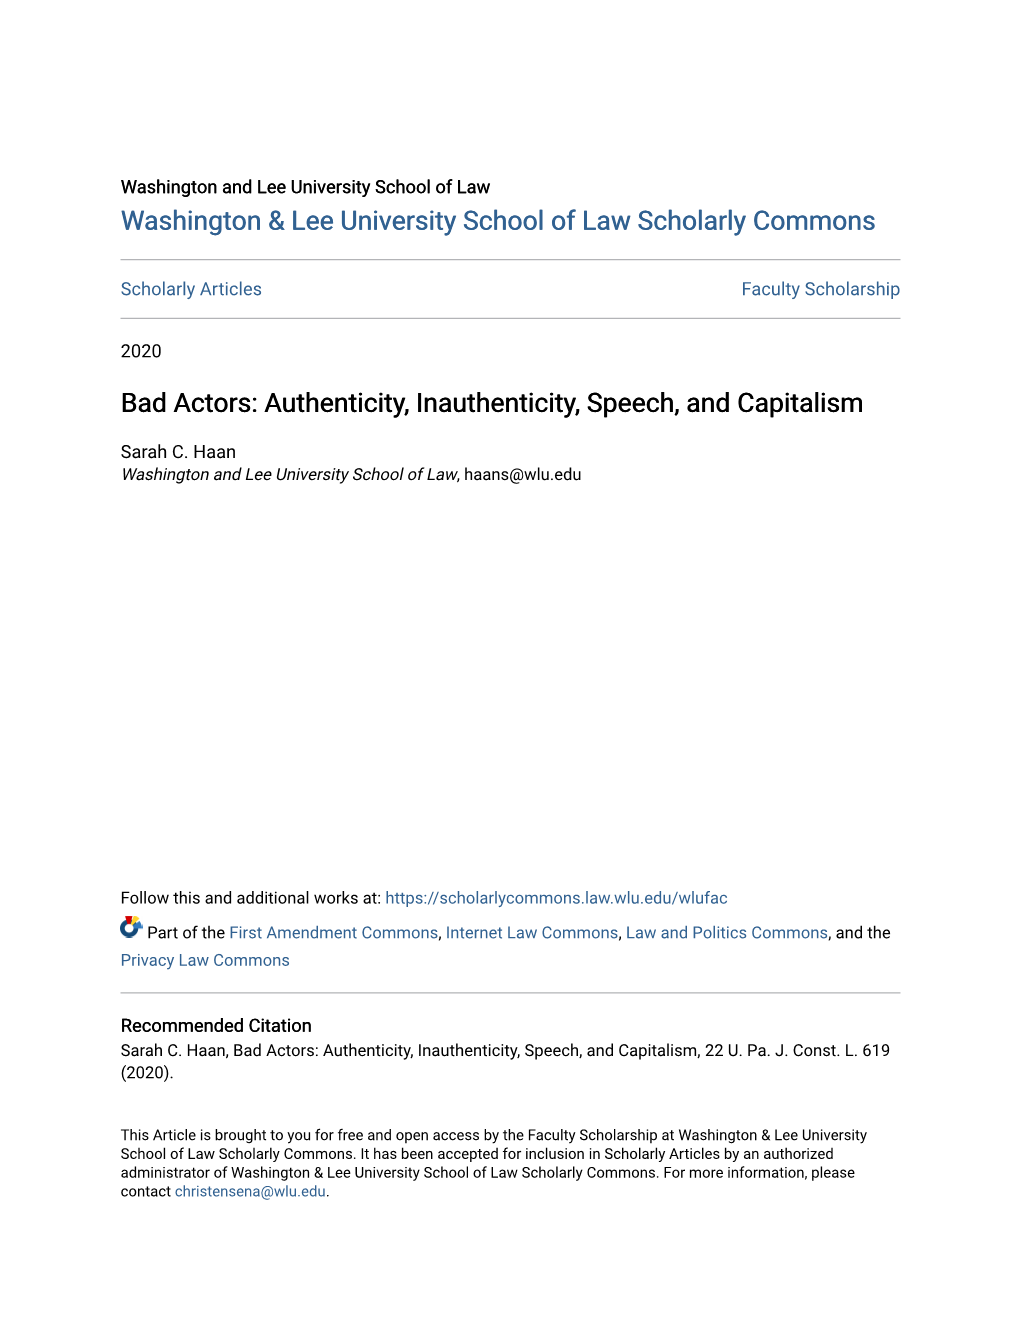 Authenticity, Inauthenticity, Speech, and Capitalism